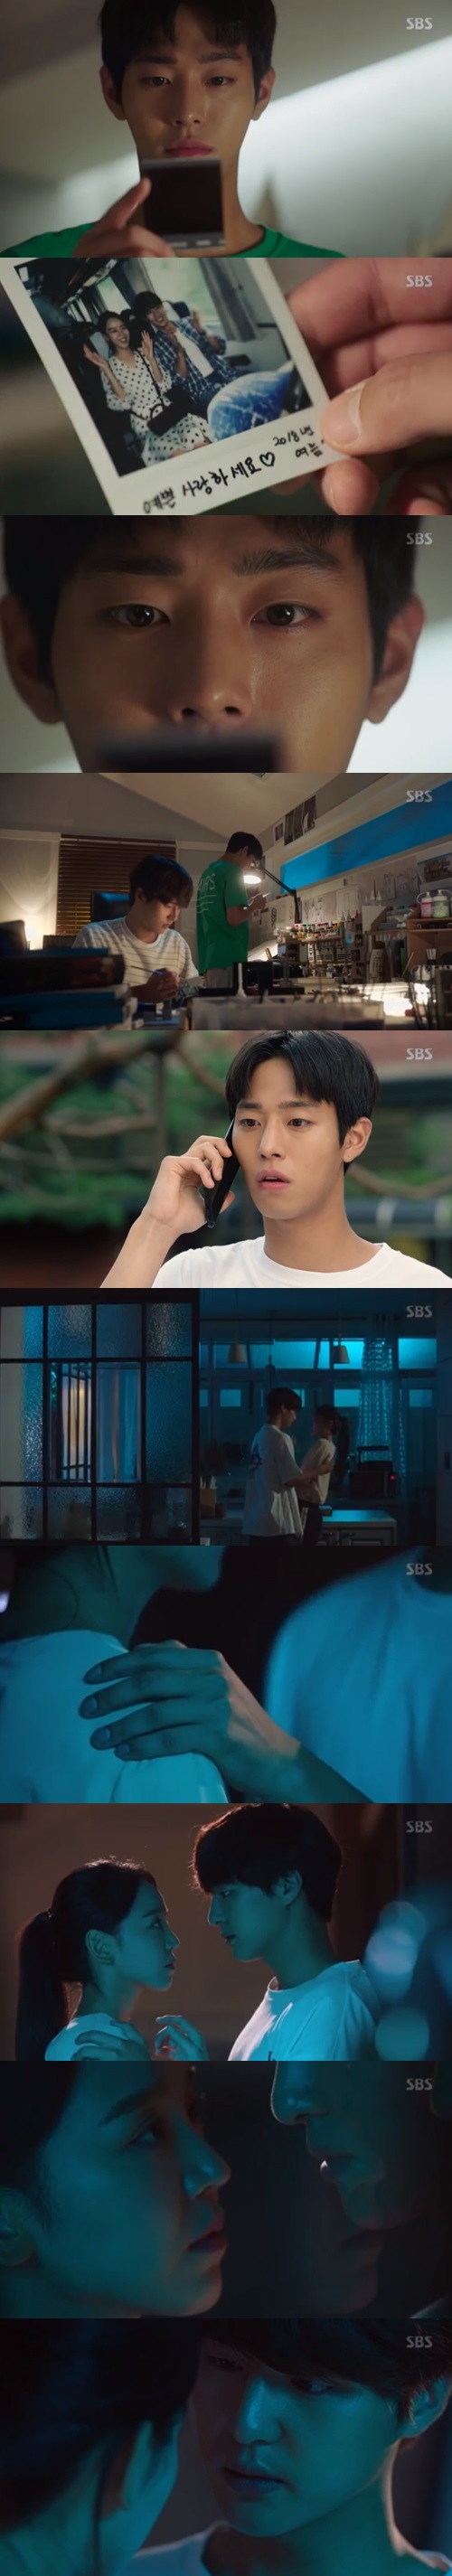 Shin Hye-sun Yang Se-jong was alone for one night, and Ahn Hyo-seop foresaw a live-action explosion.In the 17-18th episode of SBSs monthly drama Thirty but Seventeen, which aired on August 21, Yoo Chan (played by Cho Sung-hee/directed assistant) found out that he became a rival to his uncle, Gong Woo-jin (played by Yang Se-jong).Yu Chan fell in love with Ussari shortly after she came to the house where she lived before and found consciousness in 13 years, and she secretly raised her unrequited love.Although he was 11 years old, Yuchan kept his love by waiting for the day to be Confessions to Ussary at the most wonderful moment after winning the national championship.In the meantime, however, Gong Woo-jin and Usari were close.Gong Woo-jins sister, who came in for a while, and her mother, Gong Hyun-jung (Lee A-hyun), who is Yu-chan, are all aware that the appearance of Gong Woo-jin, which is brighter than before, is thanks to Usuri.Gong Hyun-jung met his brother for only two hours and read the heart of Gong Woo-jin, saying, Do you like her?Gong Woo-jin did not answer his sisters question, but after Usery went on a business trip with Kang Hee-soo (Jeong Yoo-jin), he was unable to return home due to the weather warning, and his anxiety exploded and became aware of his love.When he could not talk to Utheri on the phone, he was worried about it, and he waited for the phone while looking at his cell phone.My nephew Yuchan, who was trying to borrow an auxiliary battery from such a public figure, saw the instant photographs and earphones in the bag of public figure.The instant photo was taken by college students who misunderstood Gong Woo-jin and Usuri as lovers. Earphone was a symbolic object that made Usuri move and give it to Gong Woo-jin.In these two ways, Yuchan knew that Gong Woo-jin liked a new Uther, and then Utheri returned from the island after a night, and Gong Woo-jin and Utheri also realized my love.Uthery said, I missed you so much, and then said, I wanted to see everyone.On that day, housekeeper Jennifer (Ye Ji-won) took a vacation, and Yu-chan left training.Yoo Gyeong-sang